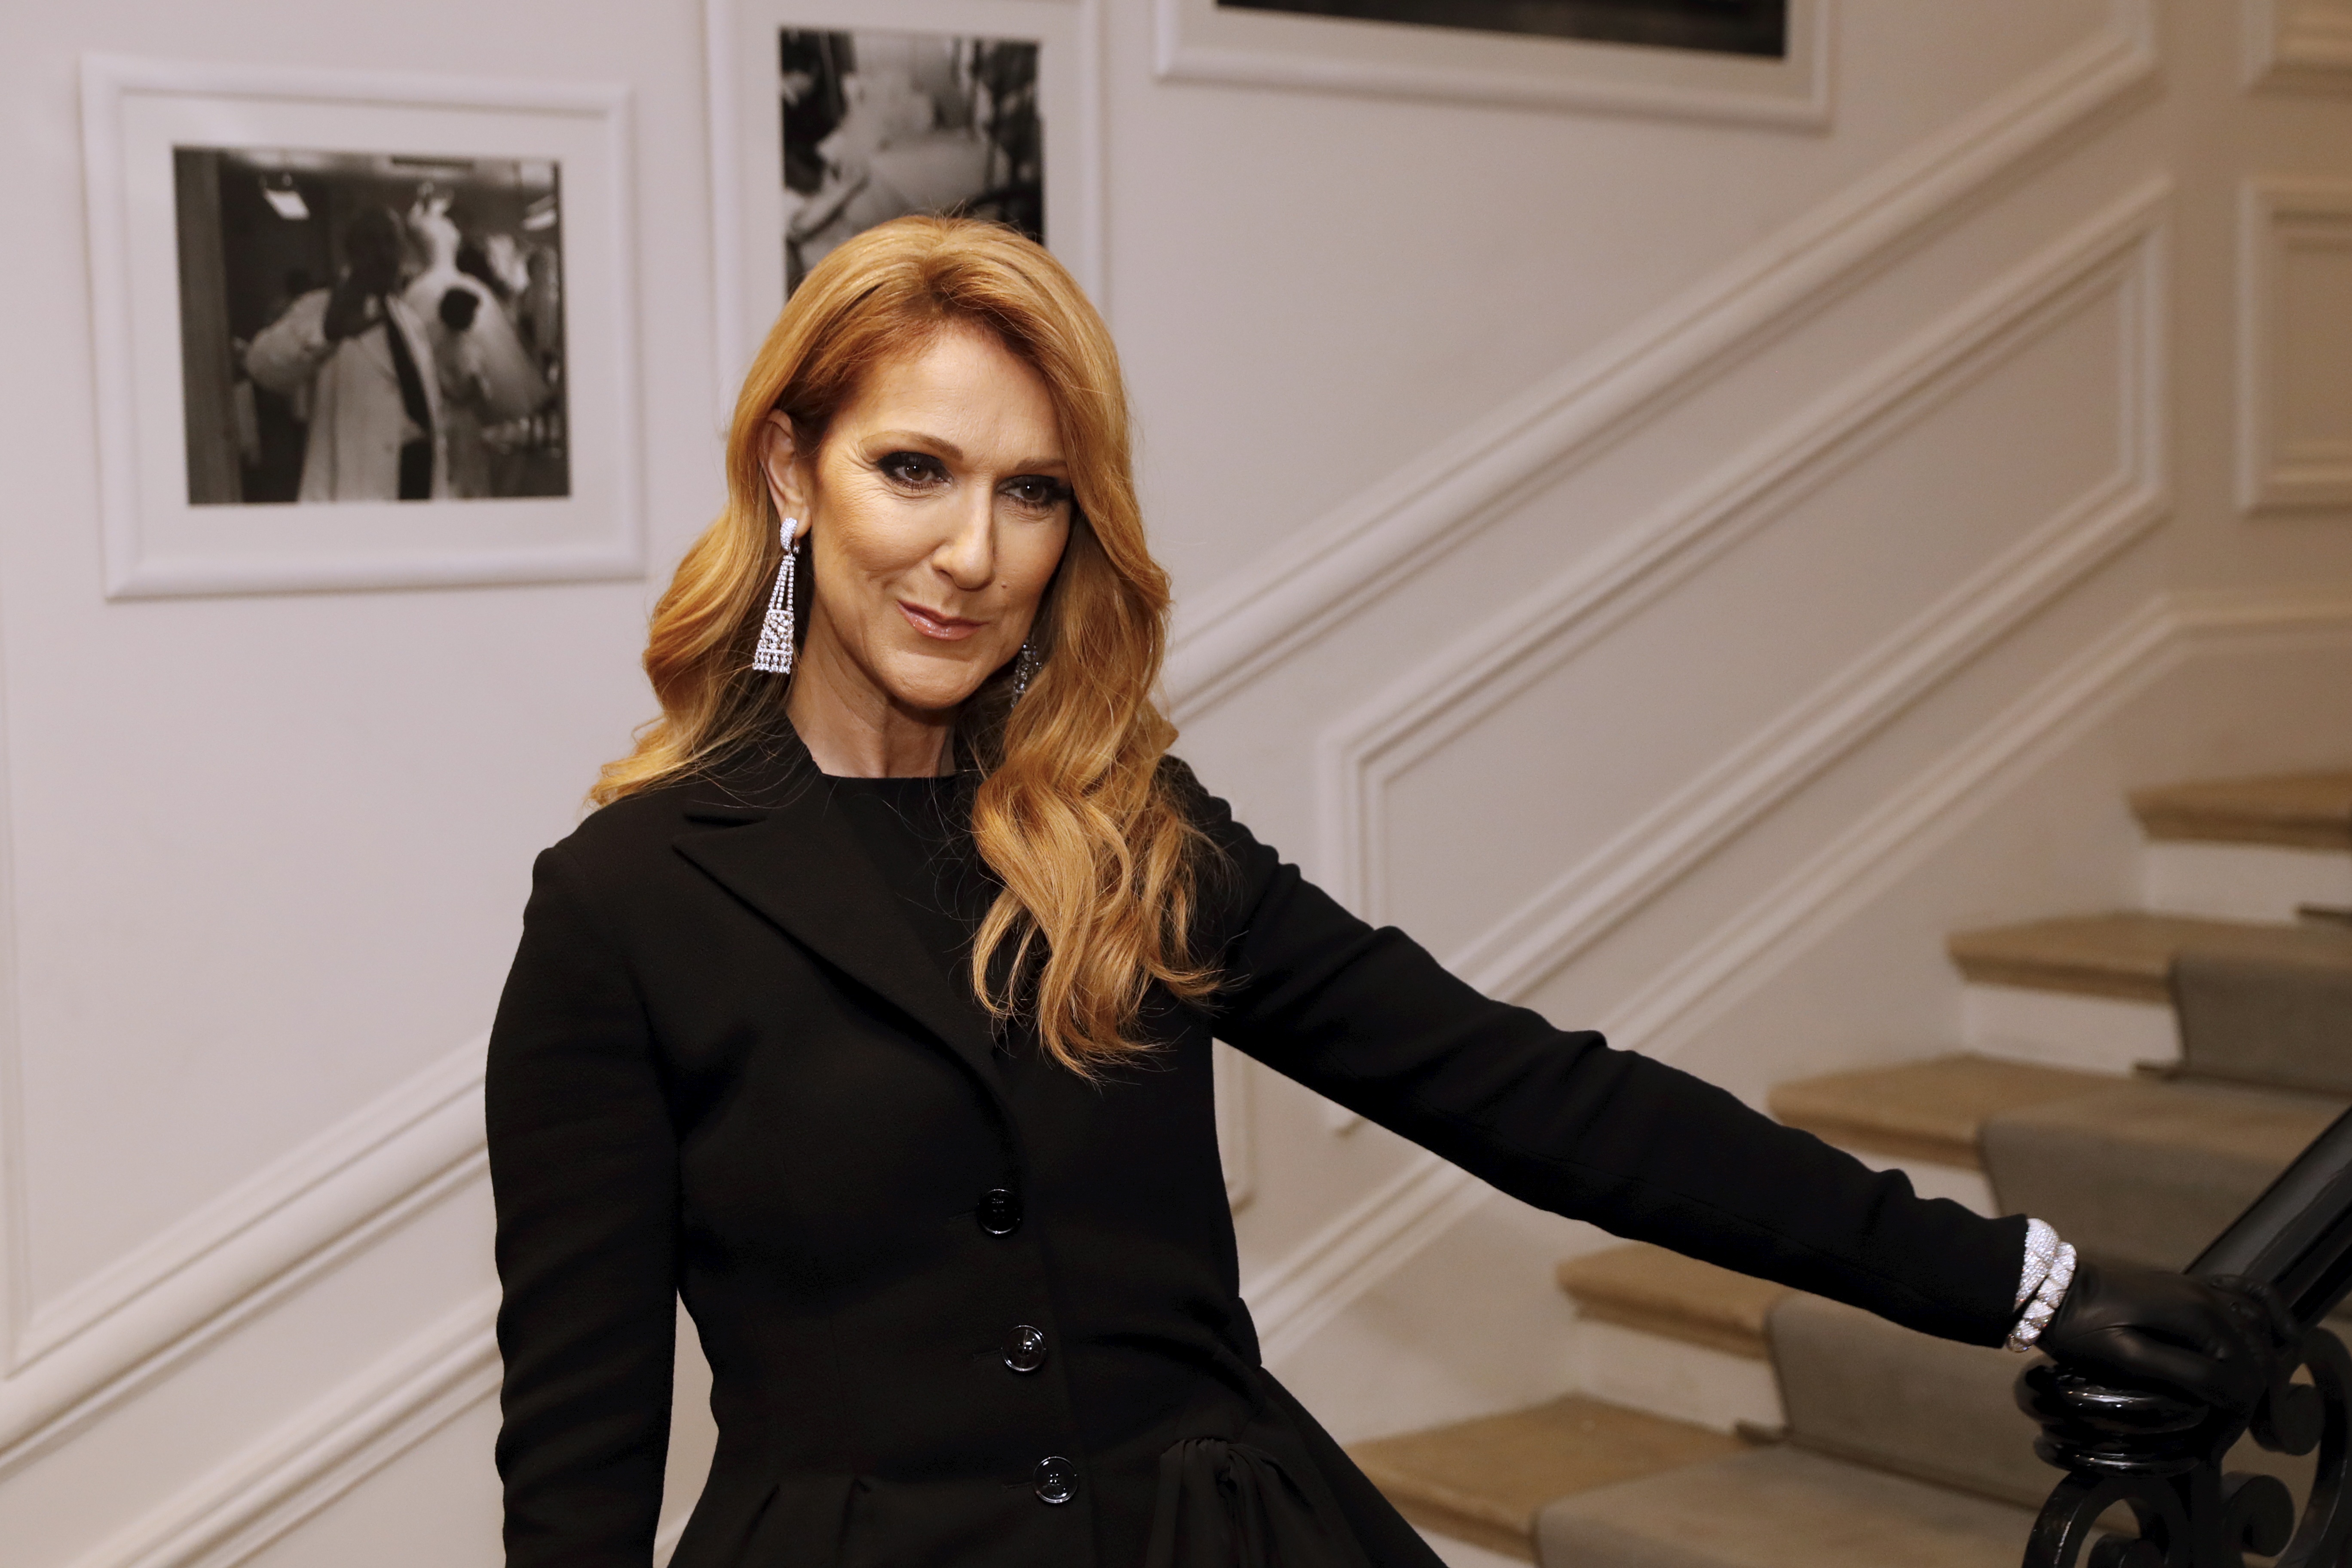 Canadian Celine Dion poses before Christian Dior 2016-2017 fall/winter Haute Couture collection fashion show on July 4, 2016 in Paris. / AFP PHOTO / PATRICK KOVARIK